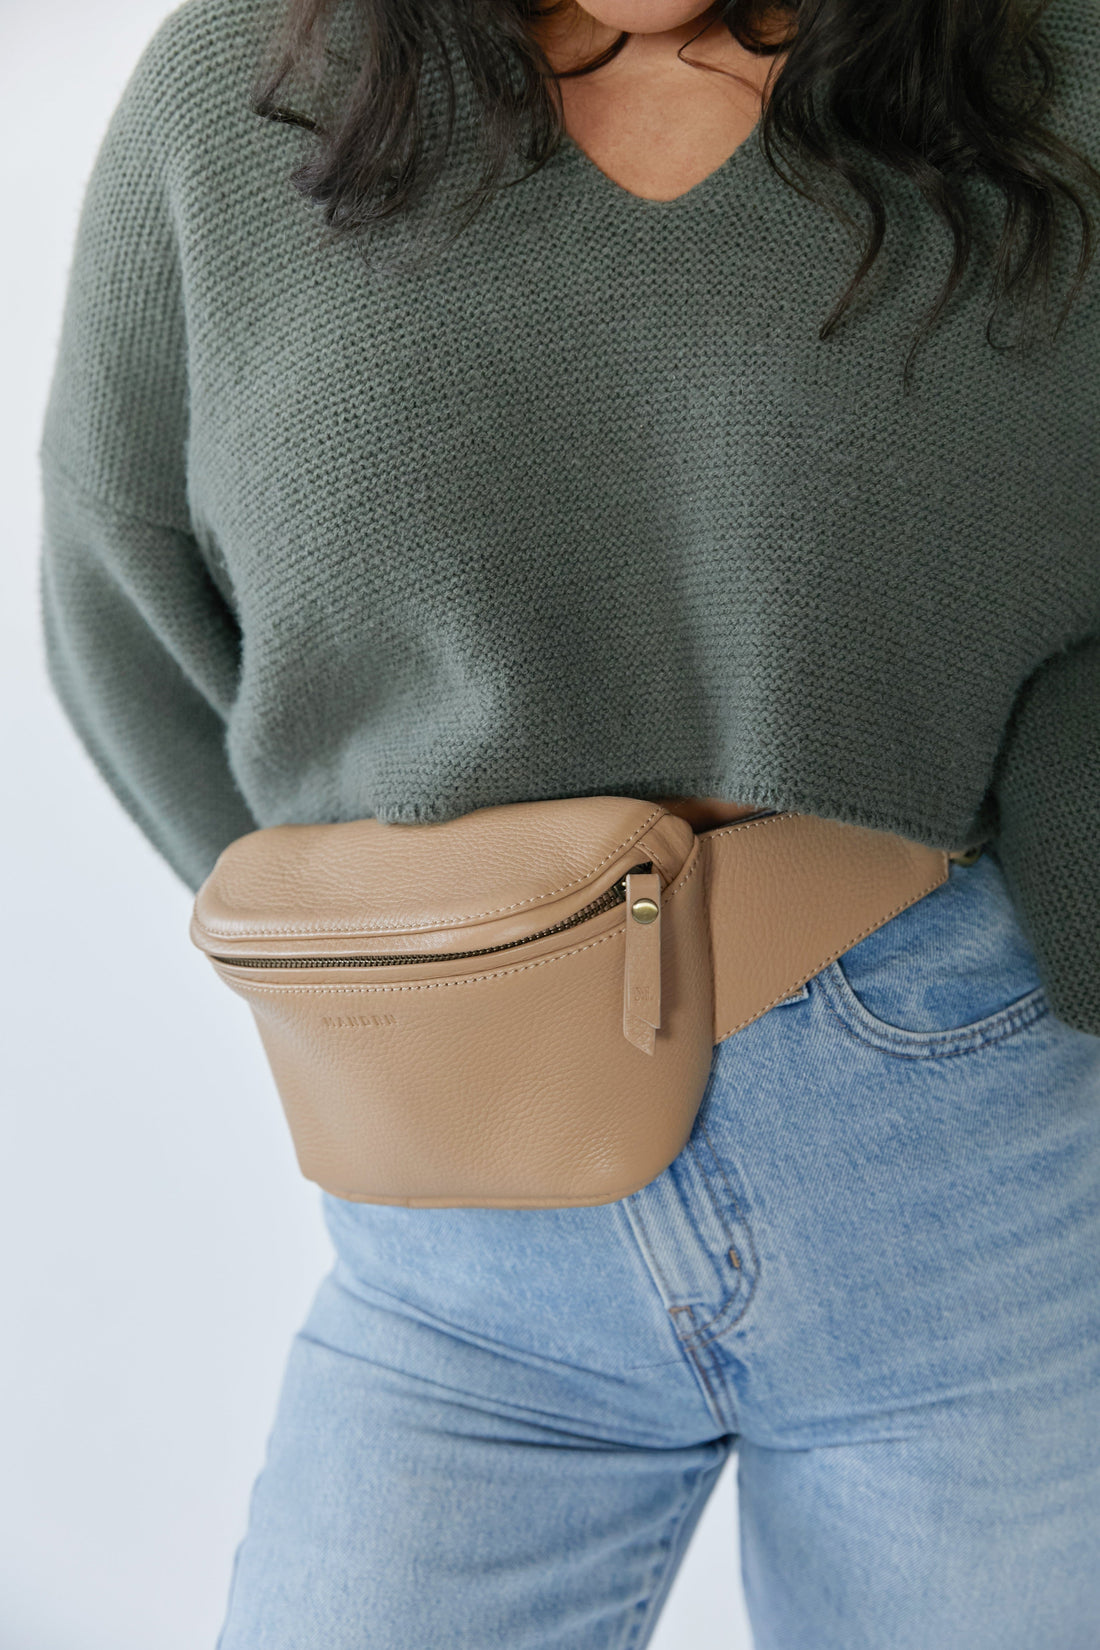 Mandrn [PRE-ORDER]- Remy - Sand Fanny Pack